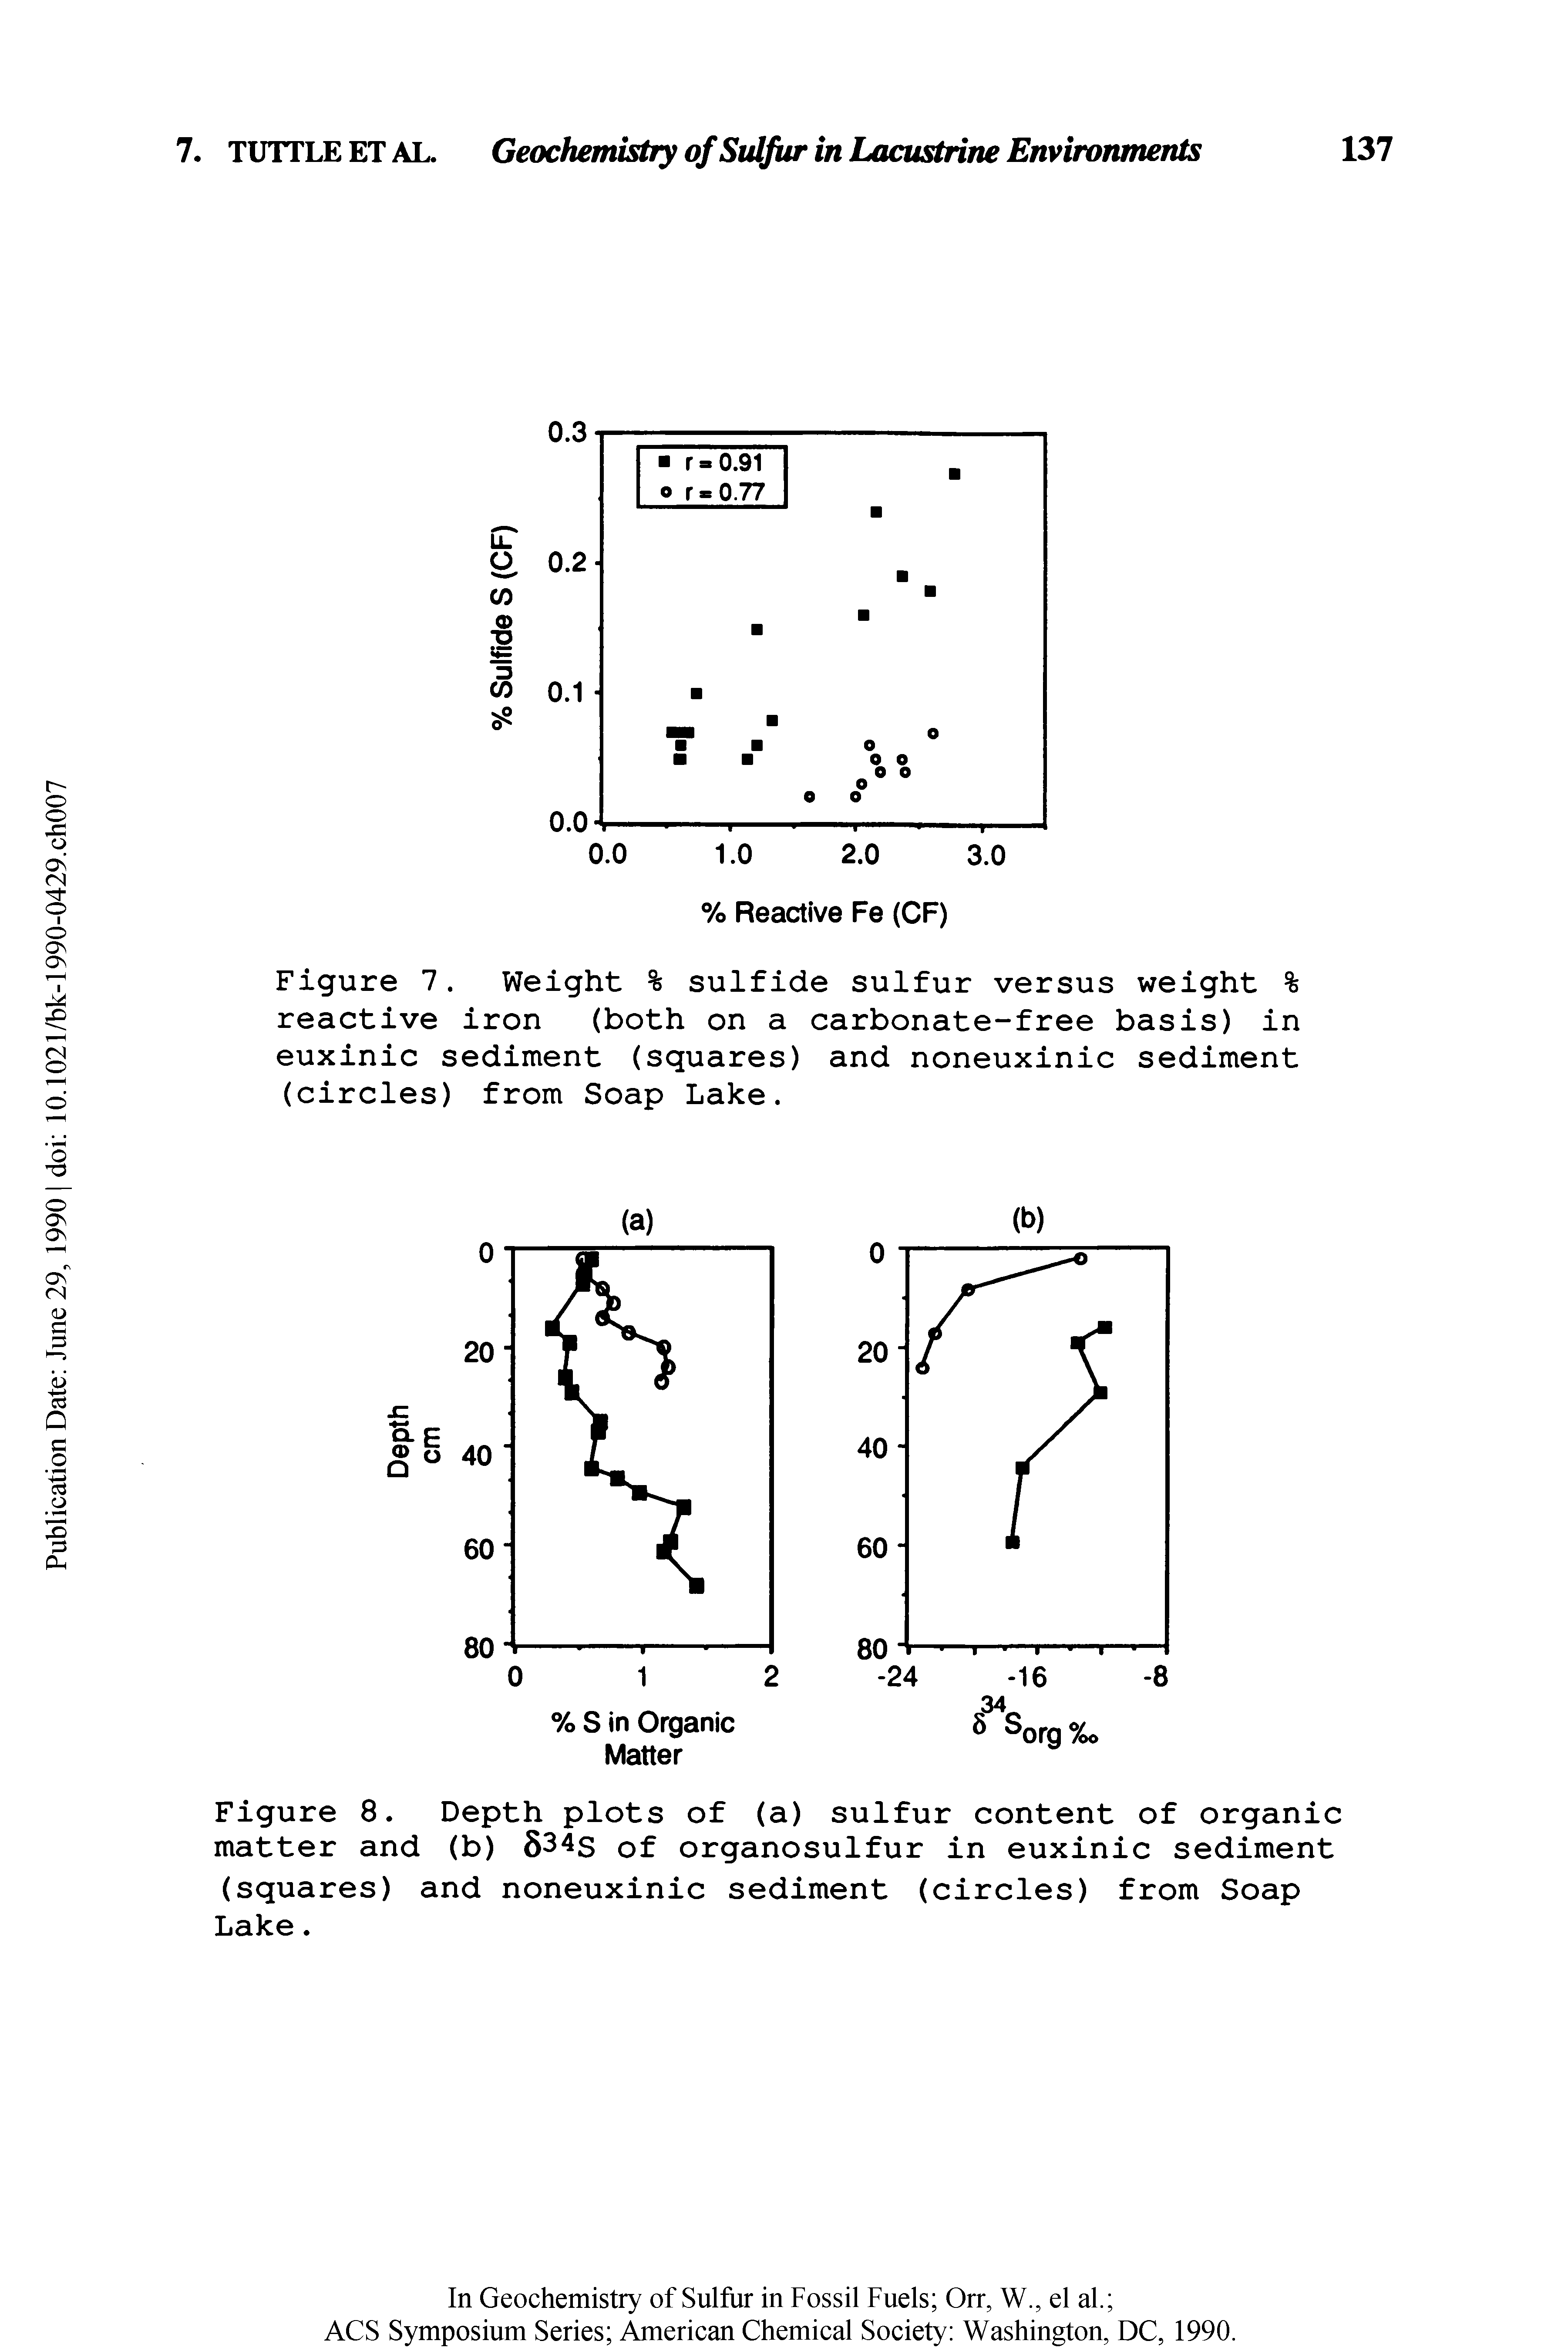 Figure 7. Weight % sulfide sulfur versus weight % reactive iron (both on a carbonate-free basis) in euxinic sediment (squares) and noneuxinic sediment (circles) from Soap Lake.